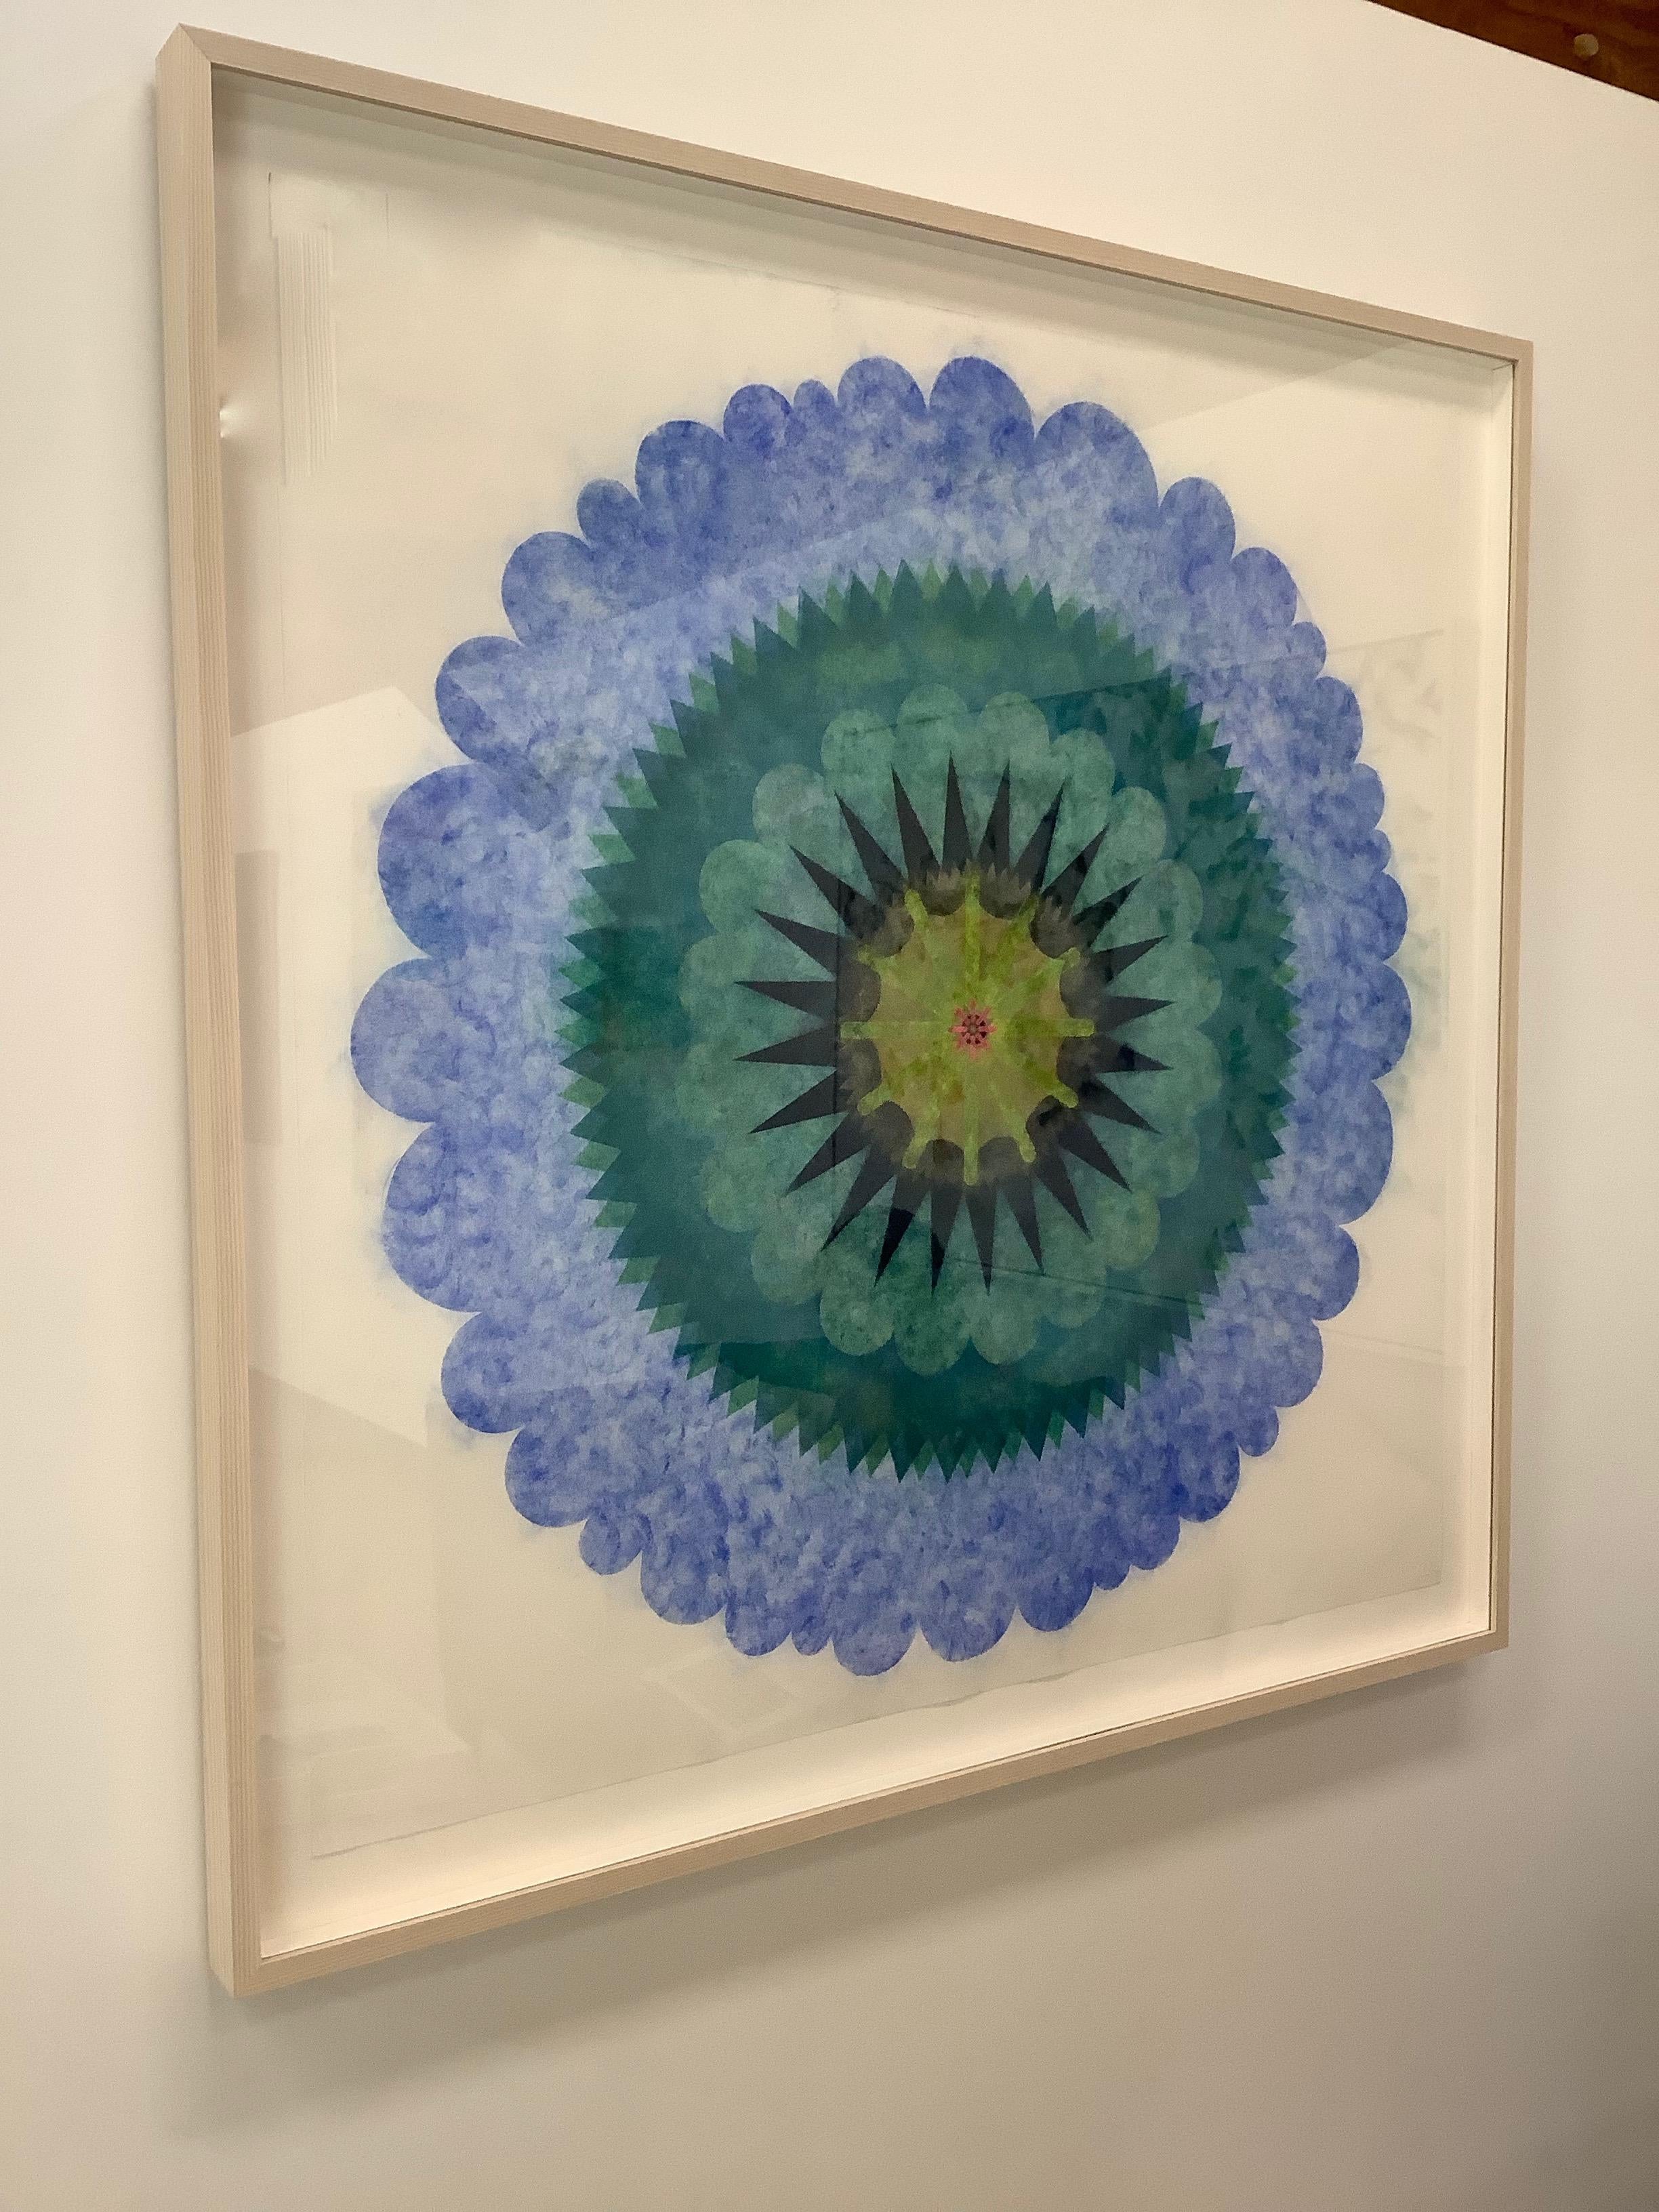 This multicolored drawing has a beautiful, soft mottled texture created with Judge's unique powered pigment technique. Blue Opus Series 8 is a predominately blue mandala shape with a golden yellow, black, red and green  center creating an